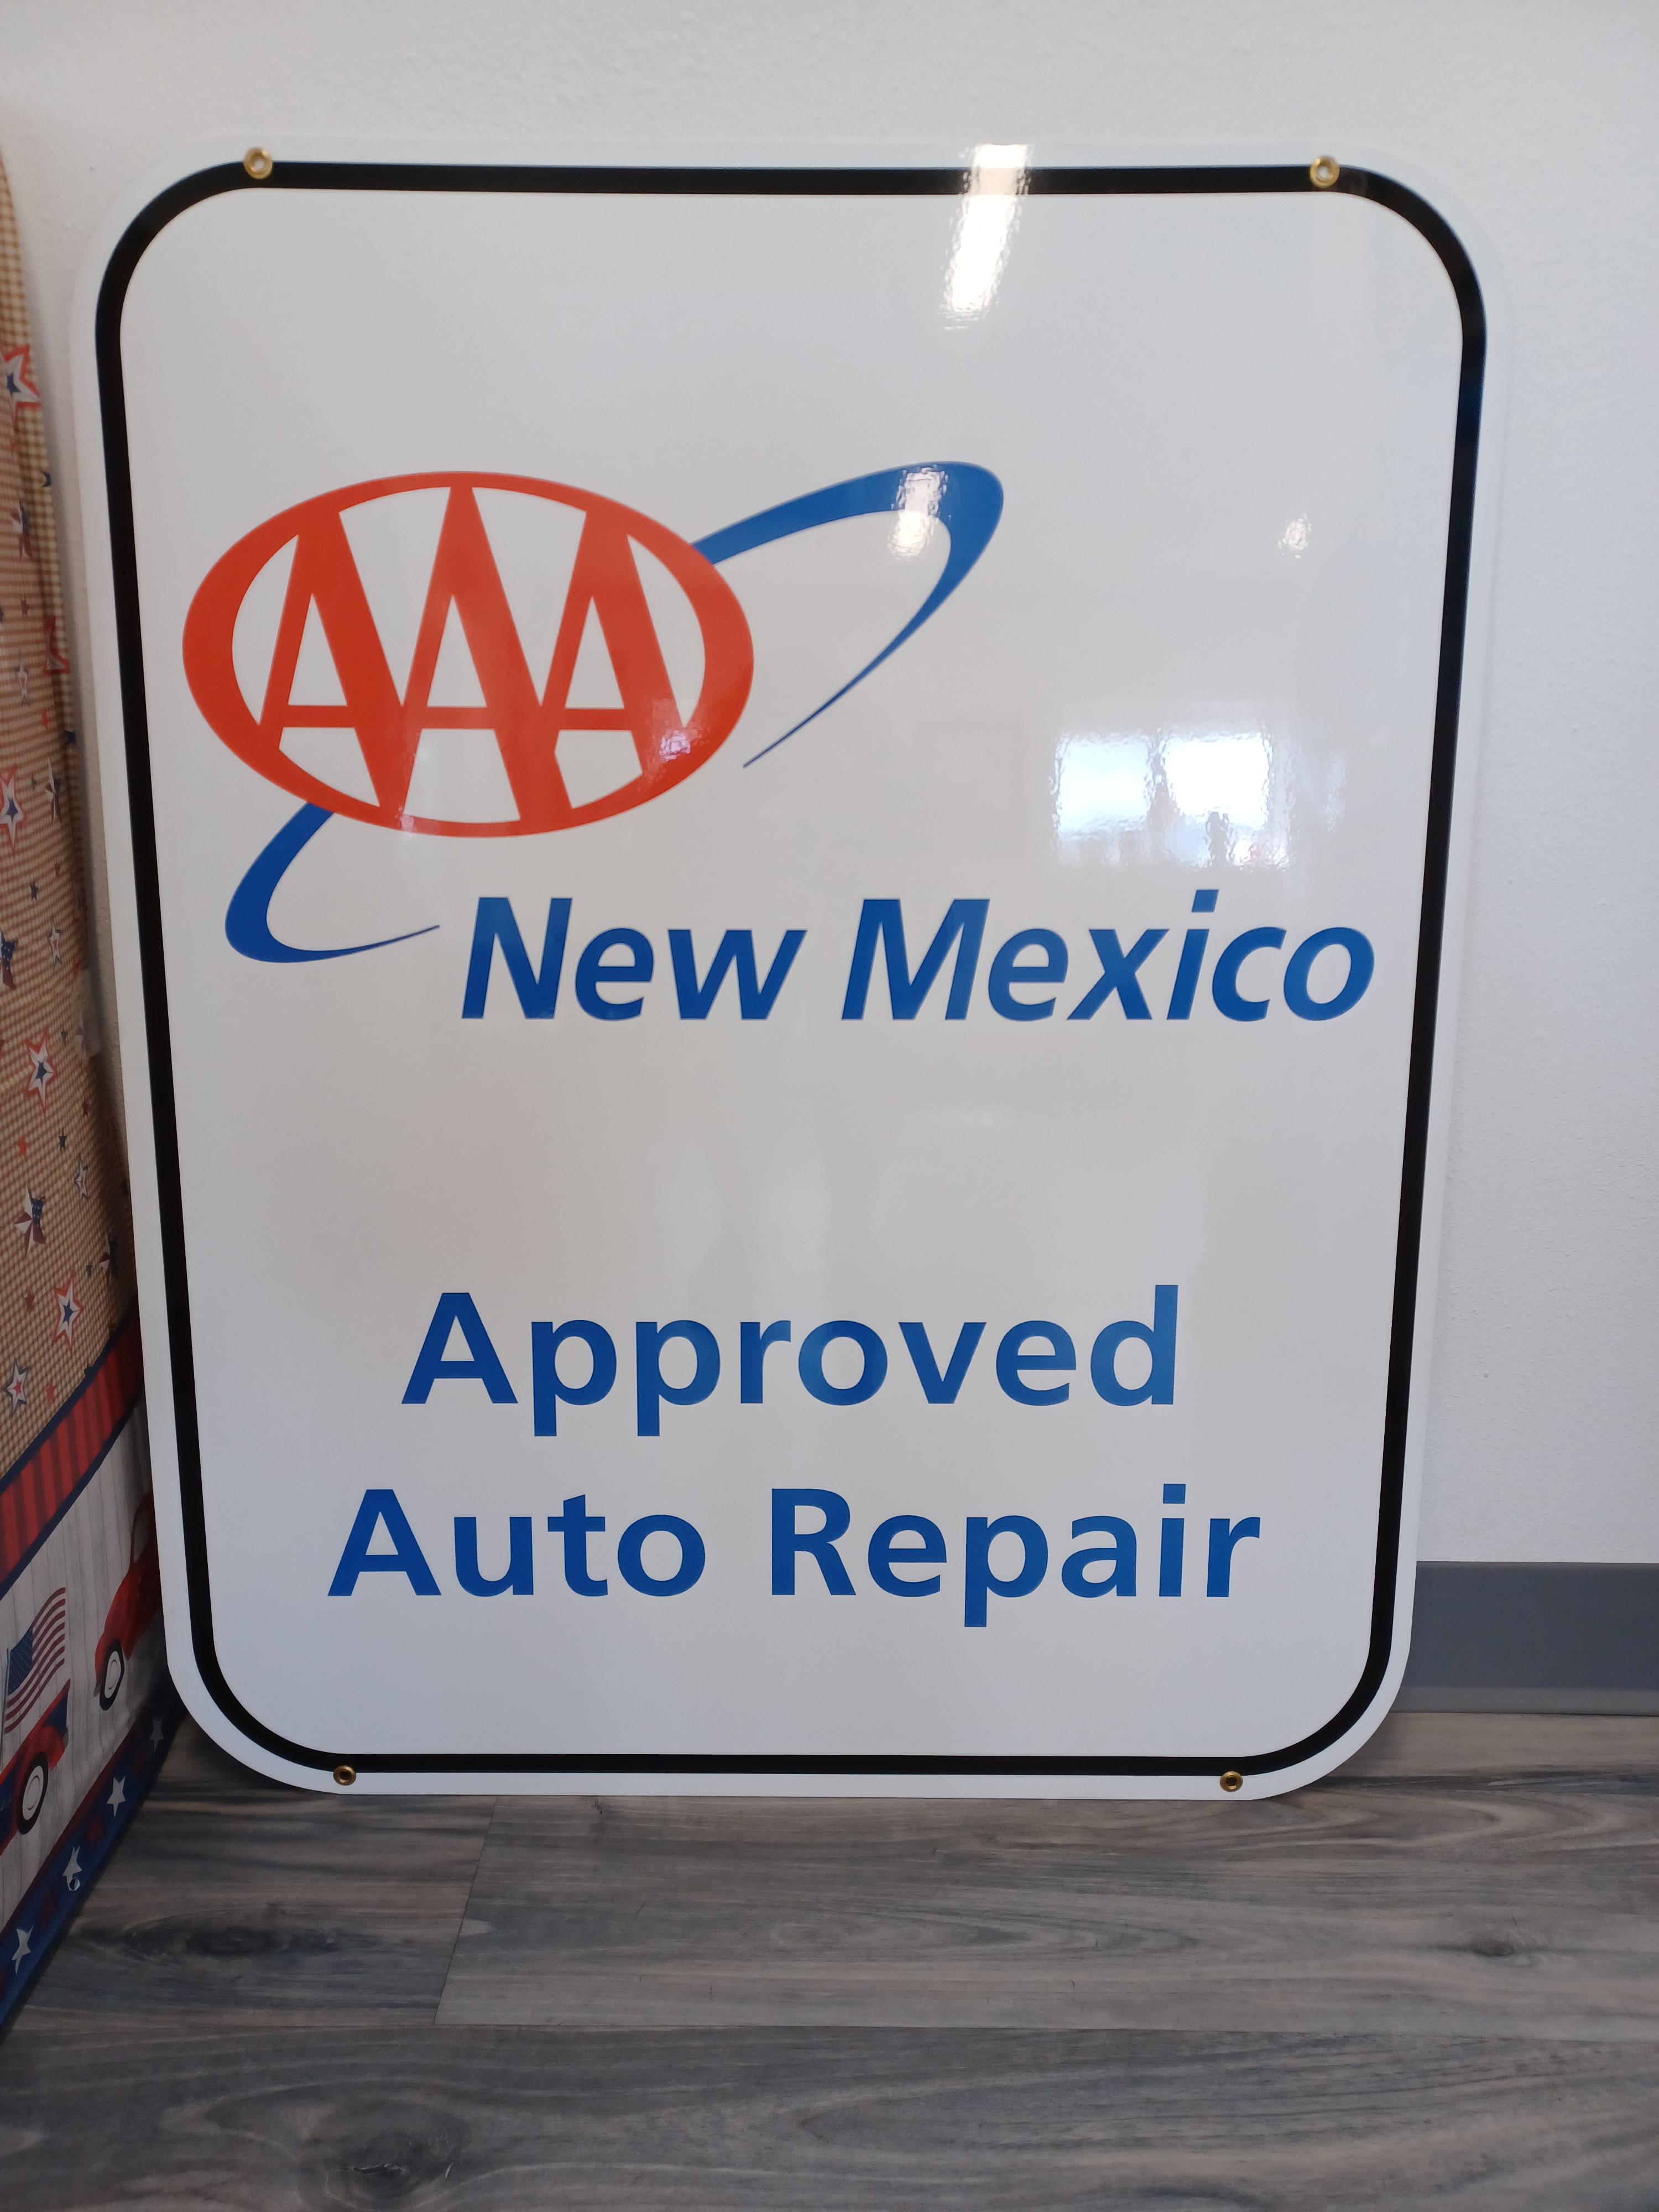 Advantage Automotive is a AAA New Mexico Approved Auto Repair shop.